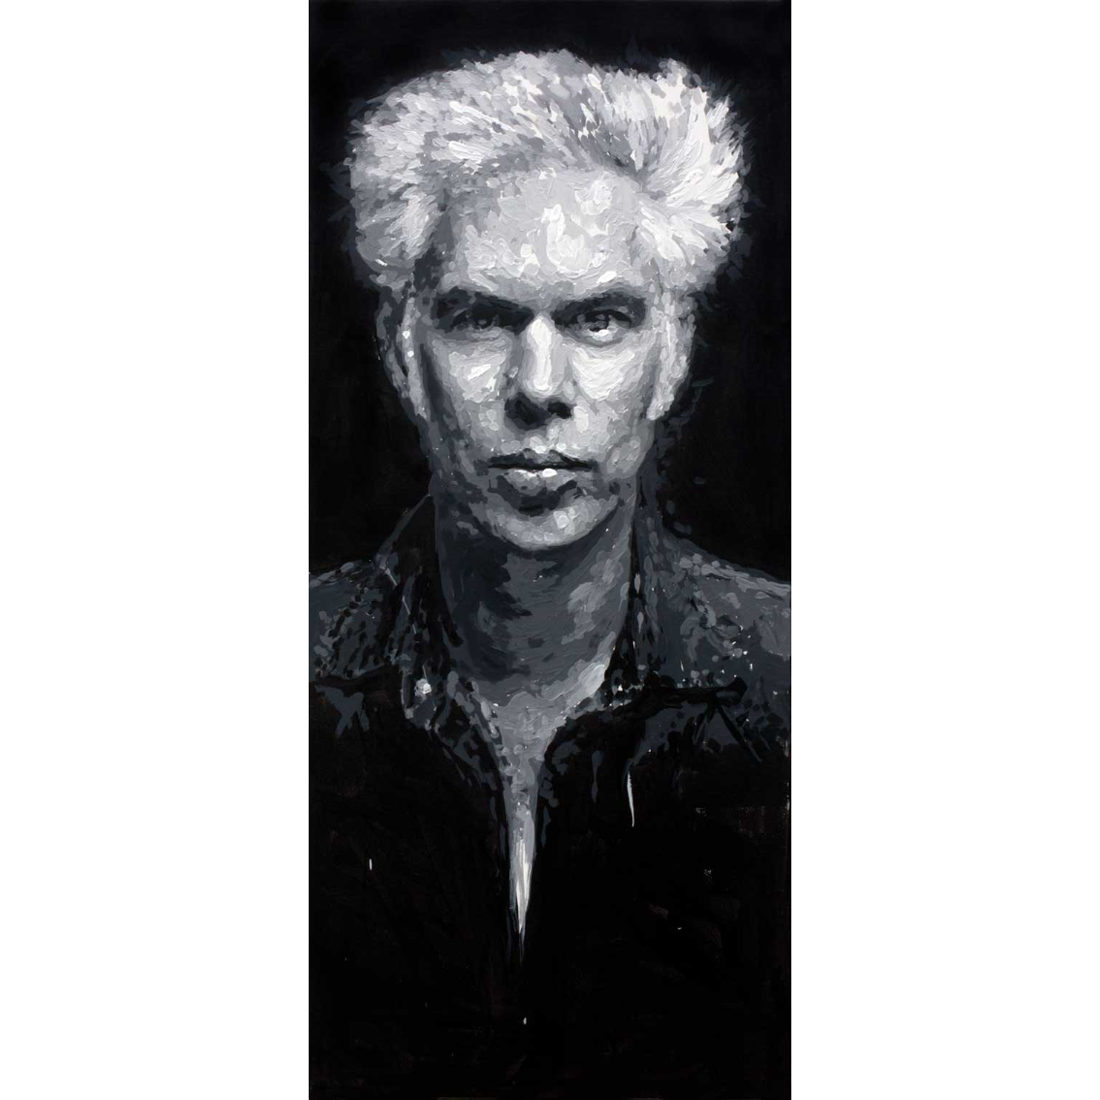 A portrait of a famous director made with acrylics on canvas. black and white. "Jarmusch" Art - Style - Picture  Black and white - Monochrome - Dark - Illustration -portrait - Artist - art - Real character - Piece of art - Modern Art - Paint   Ar